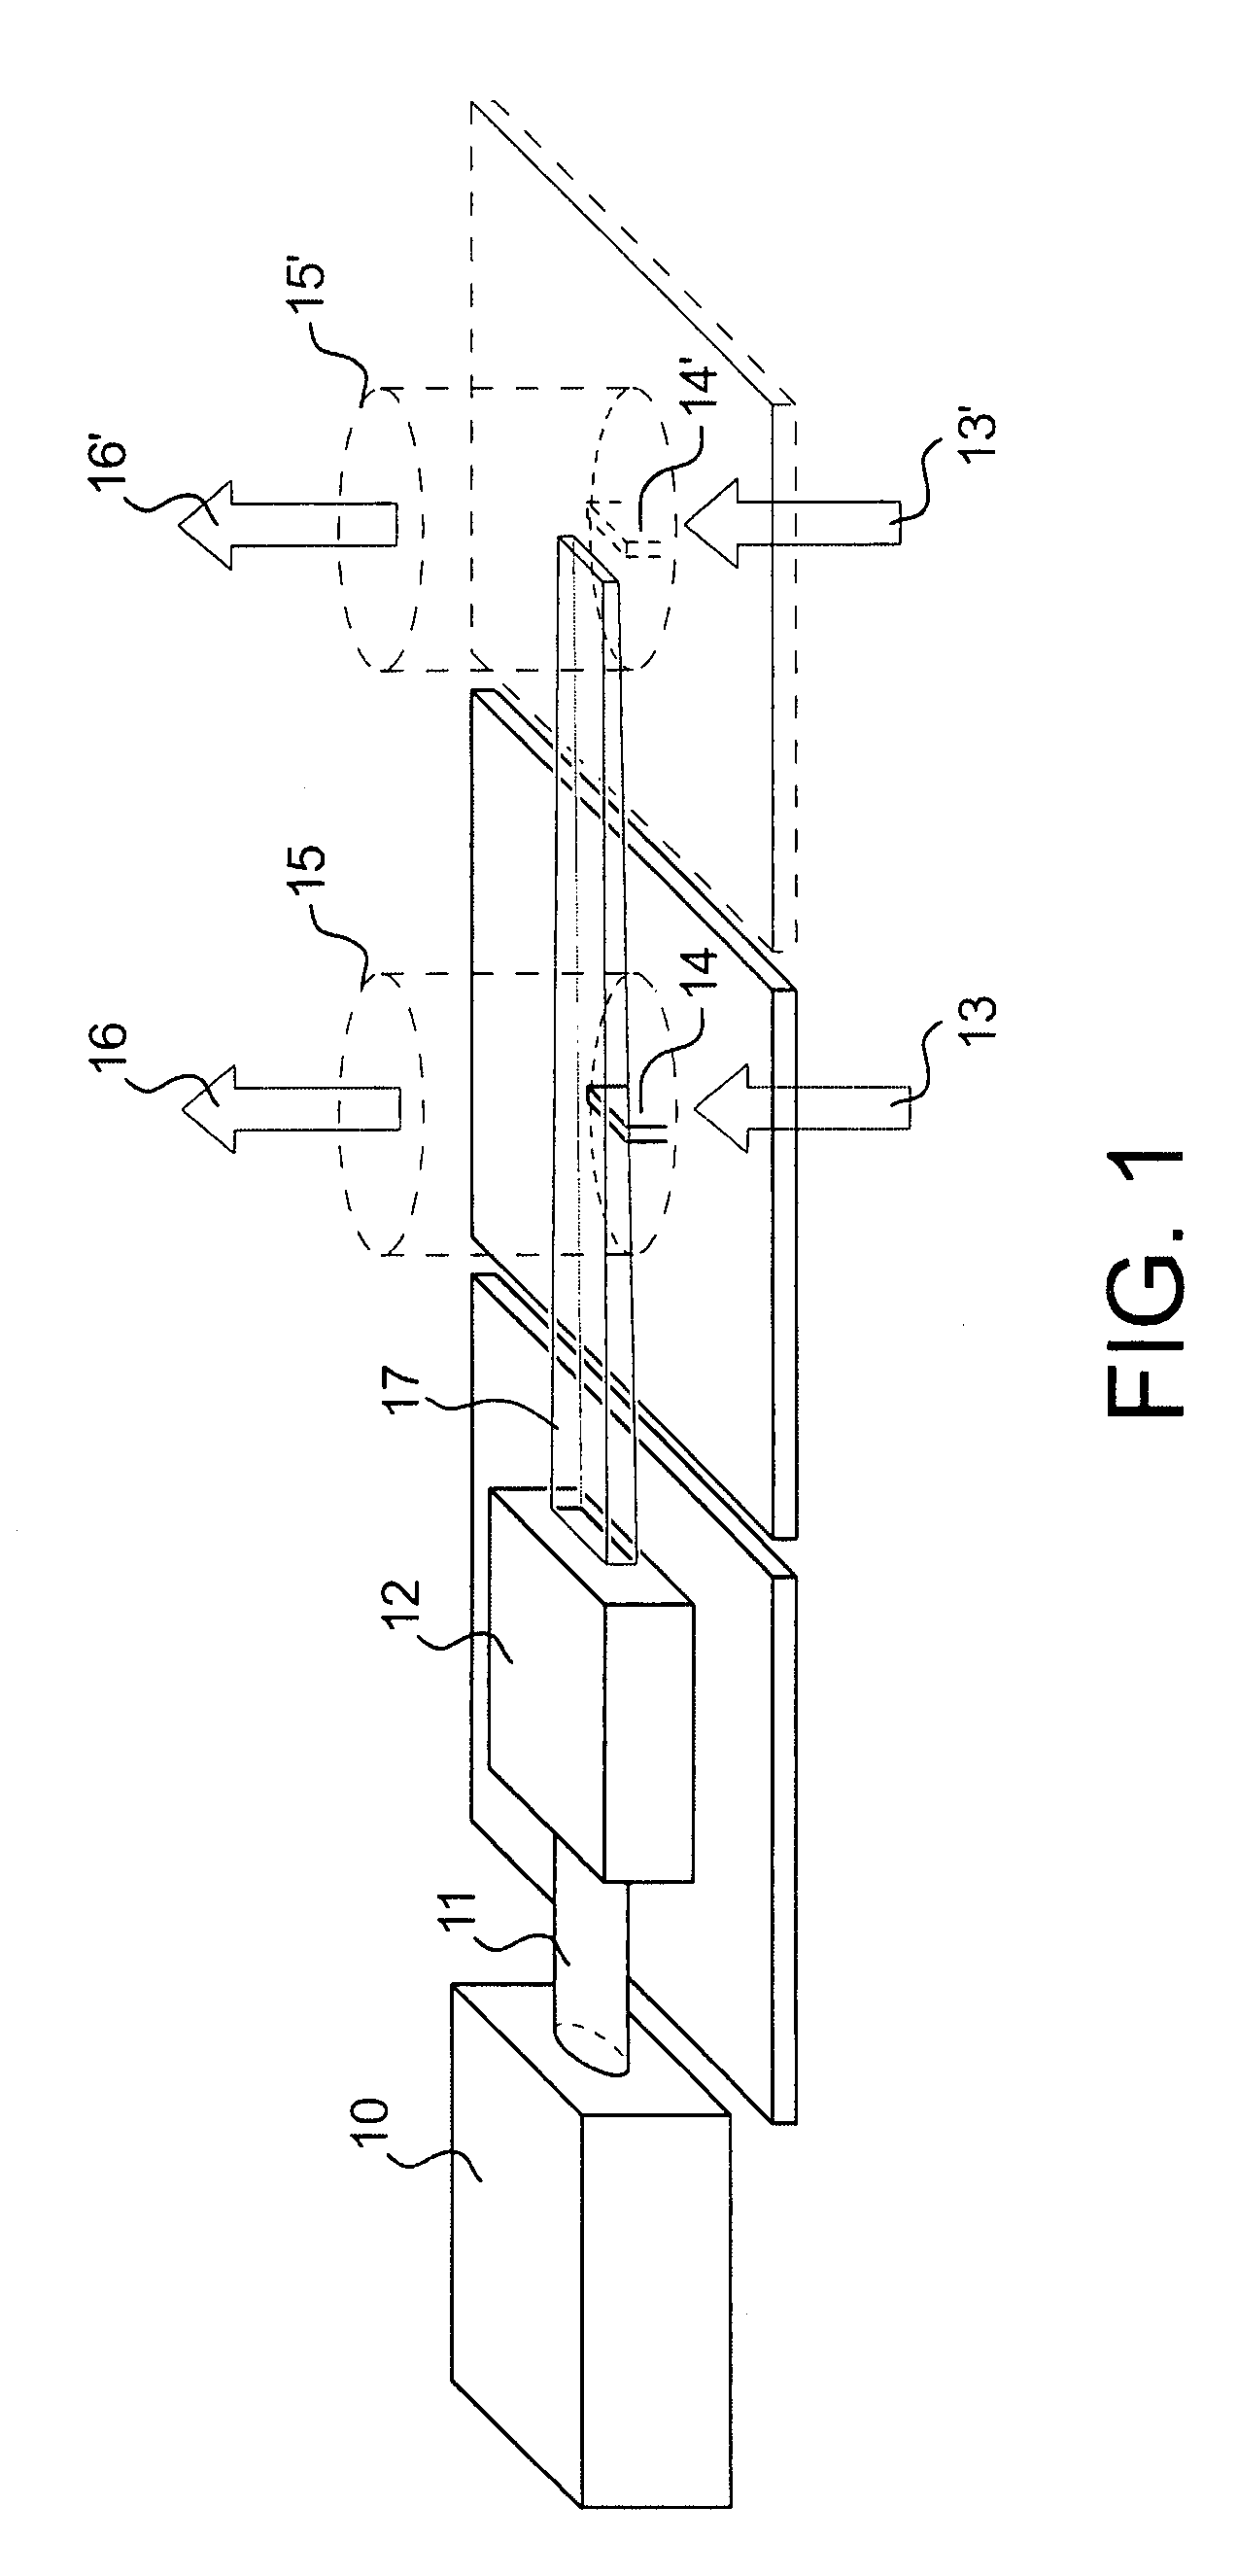 Production of nanometric or sub-micrometric powders in continuous flux